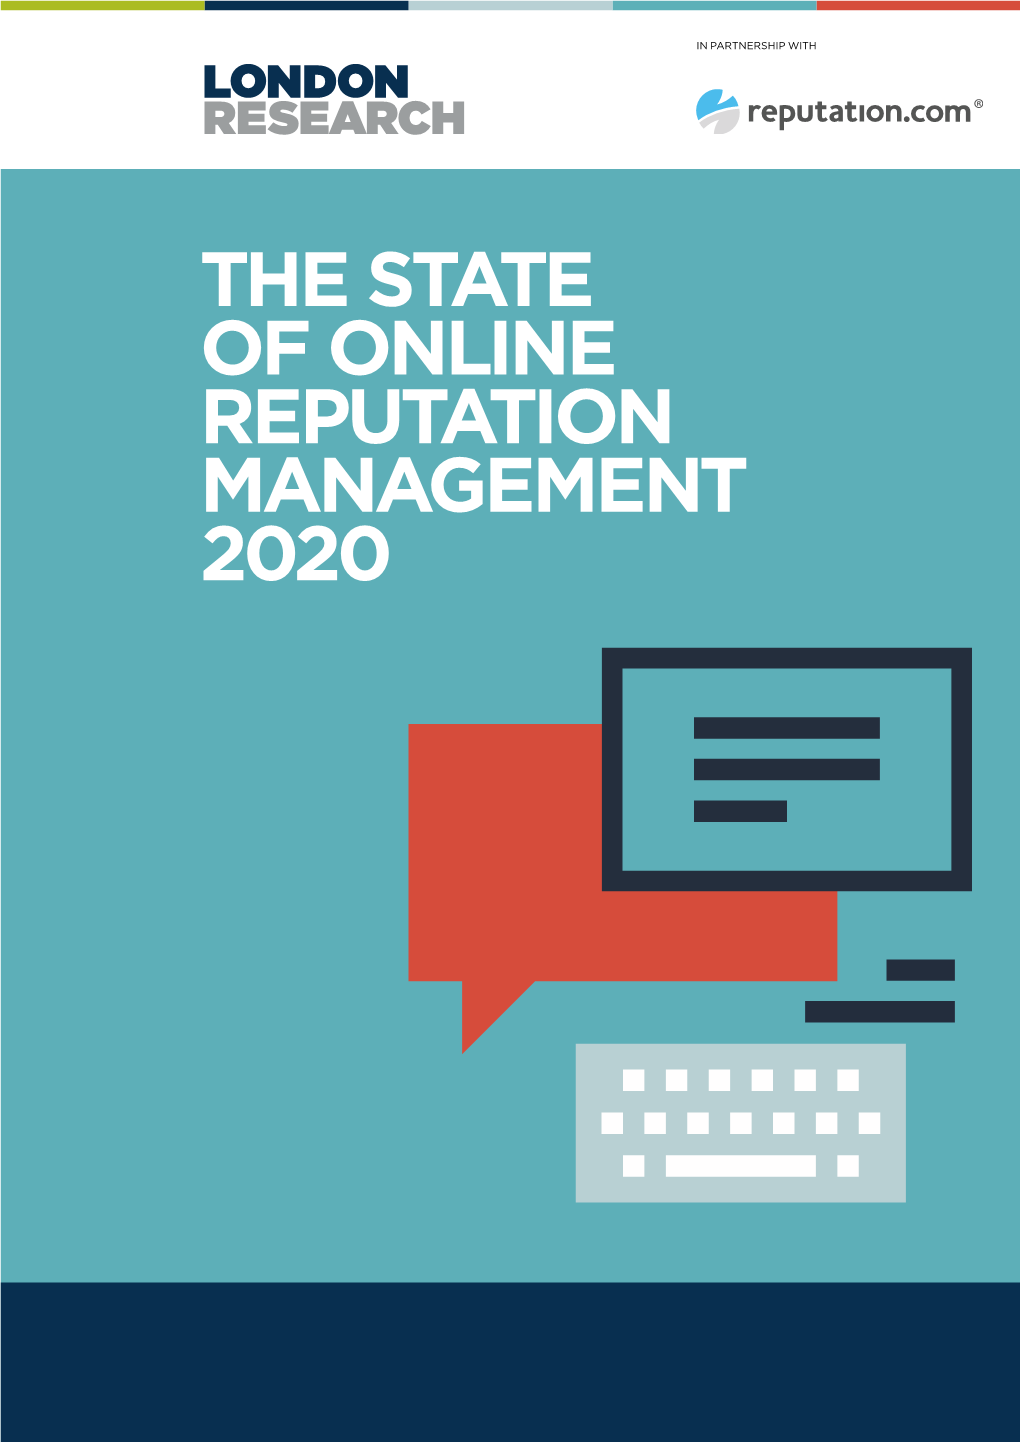 The State of Online Reputation Management 2020 the State of Online Reputation 2 Management 2020 Contents